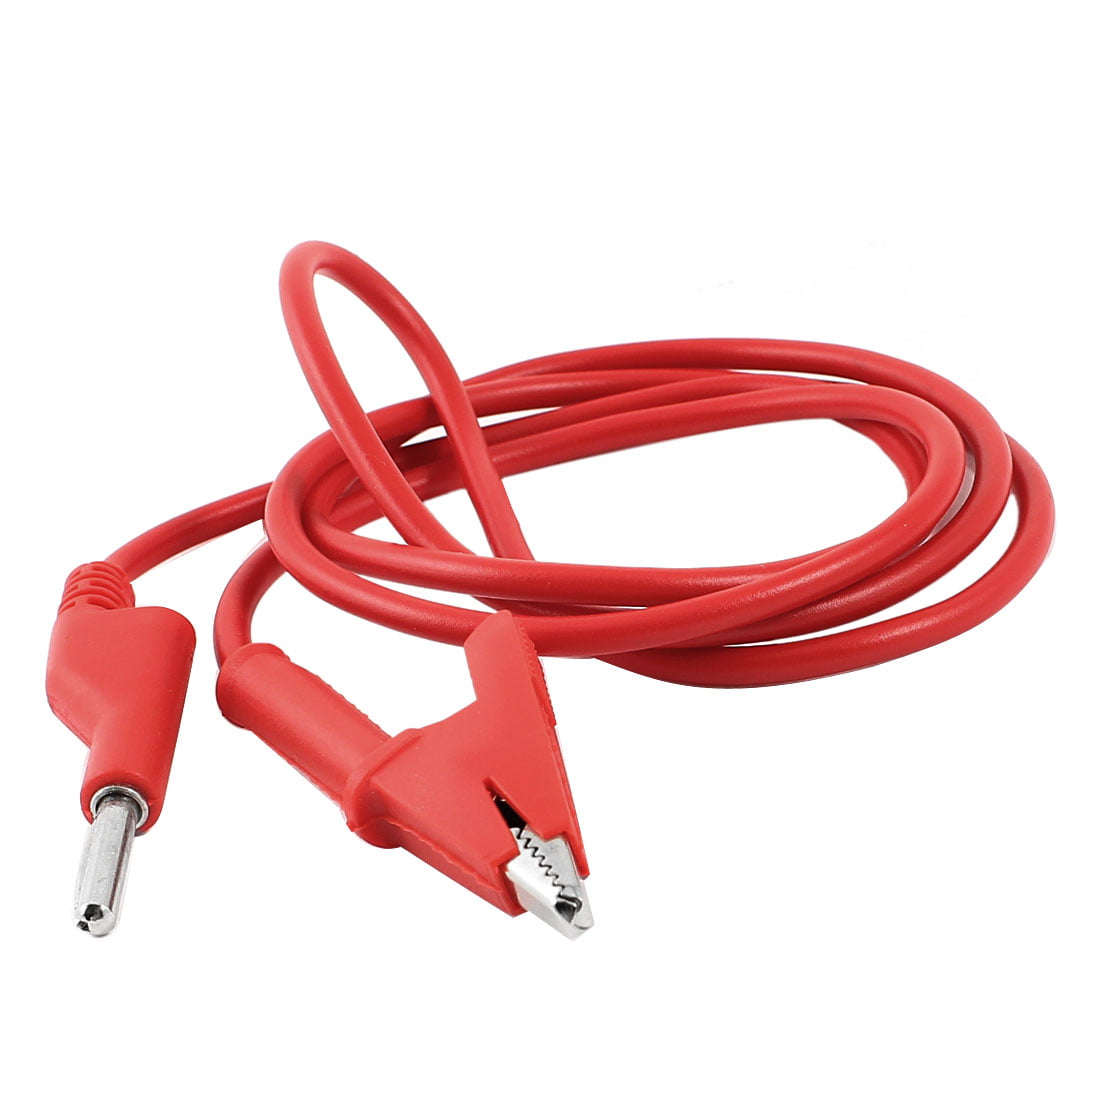 Details about   5sets 4mm 1M Angle Probe Banana Plug to Alligator Clip Multimeter Lead Cable 